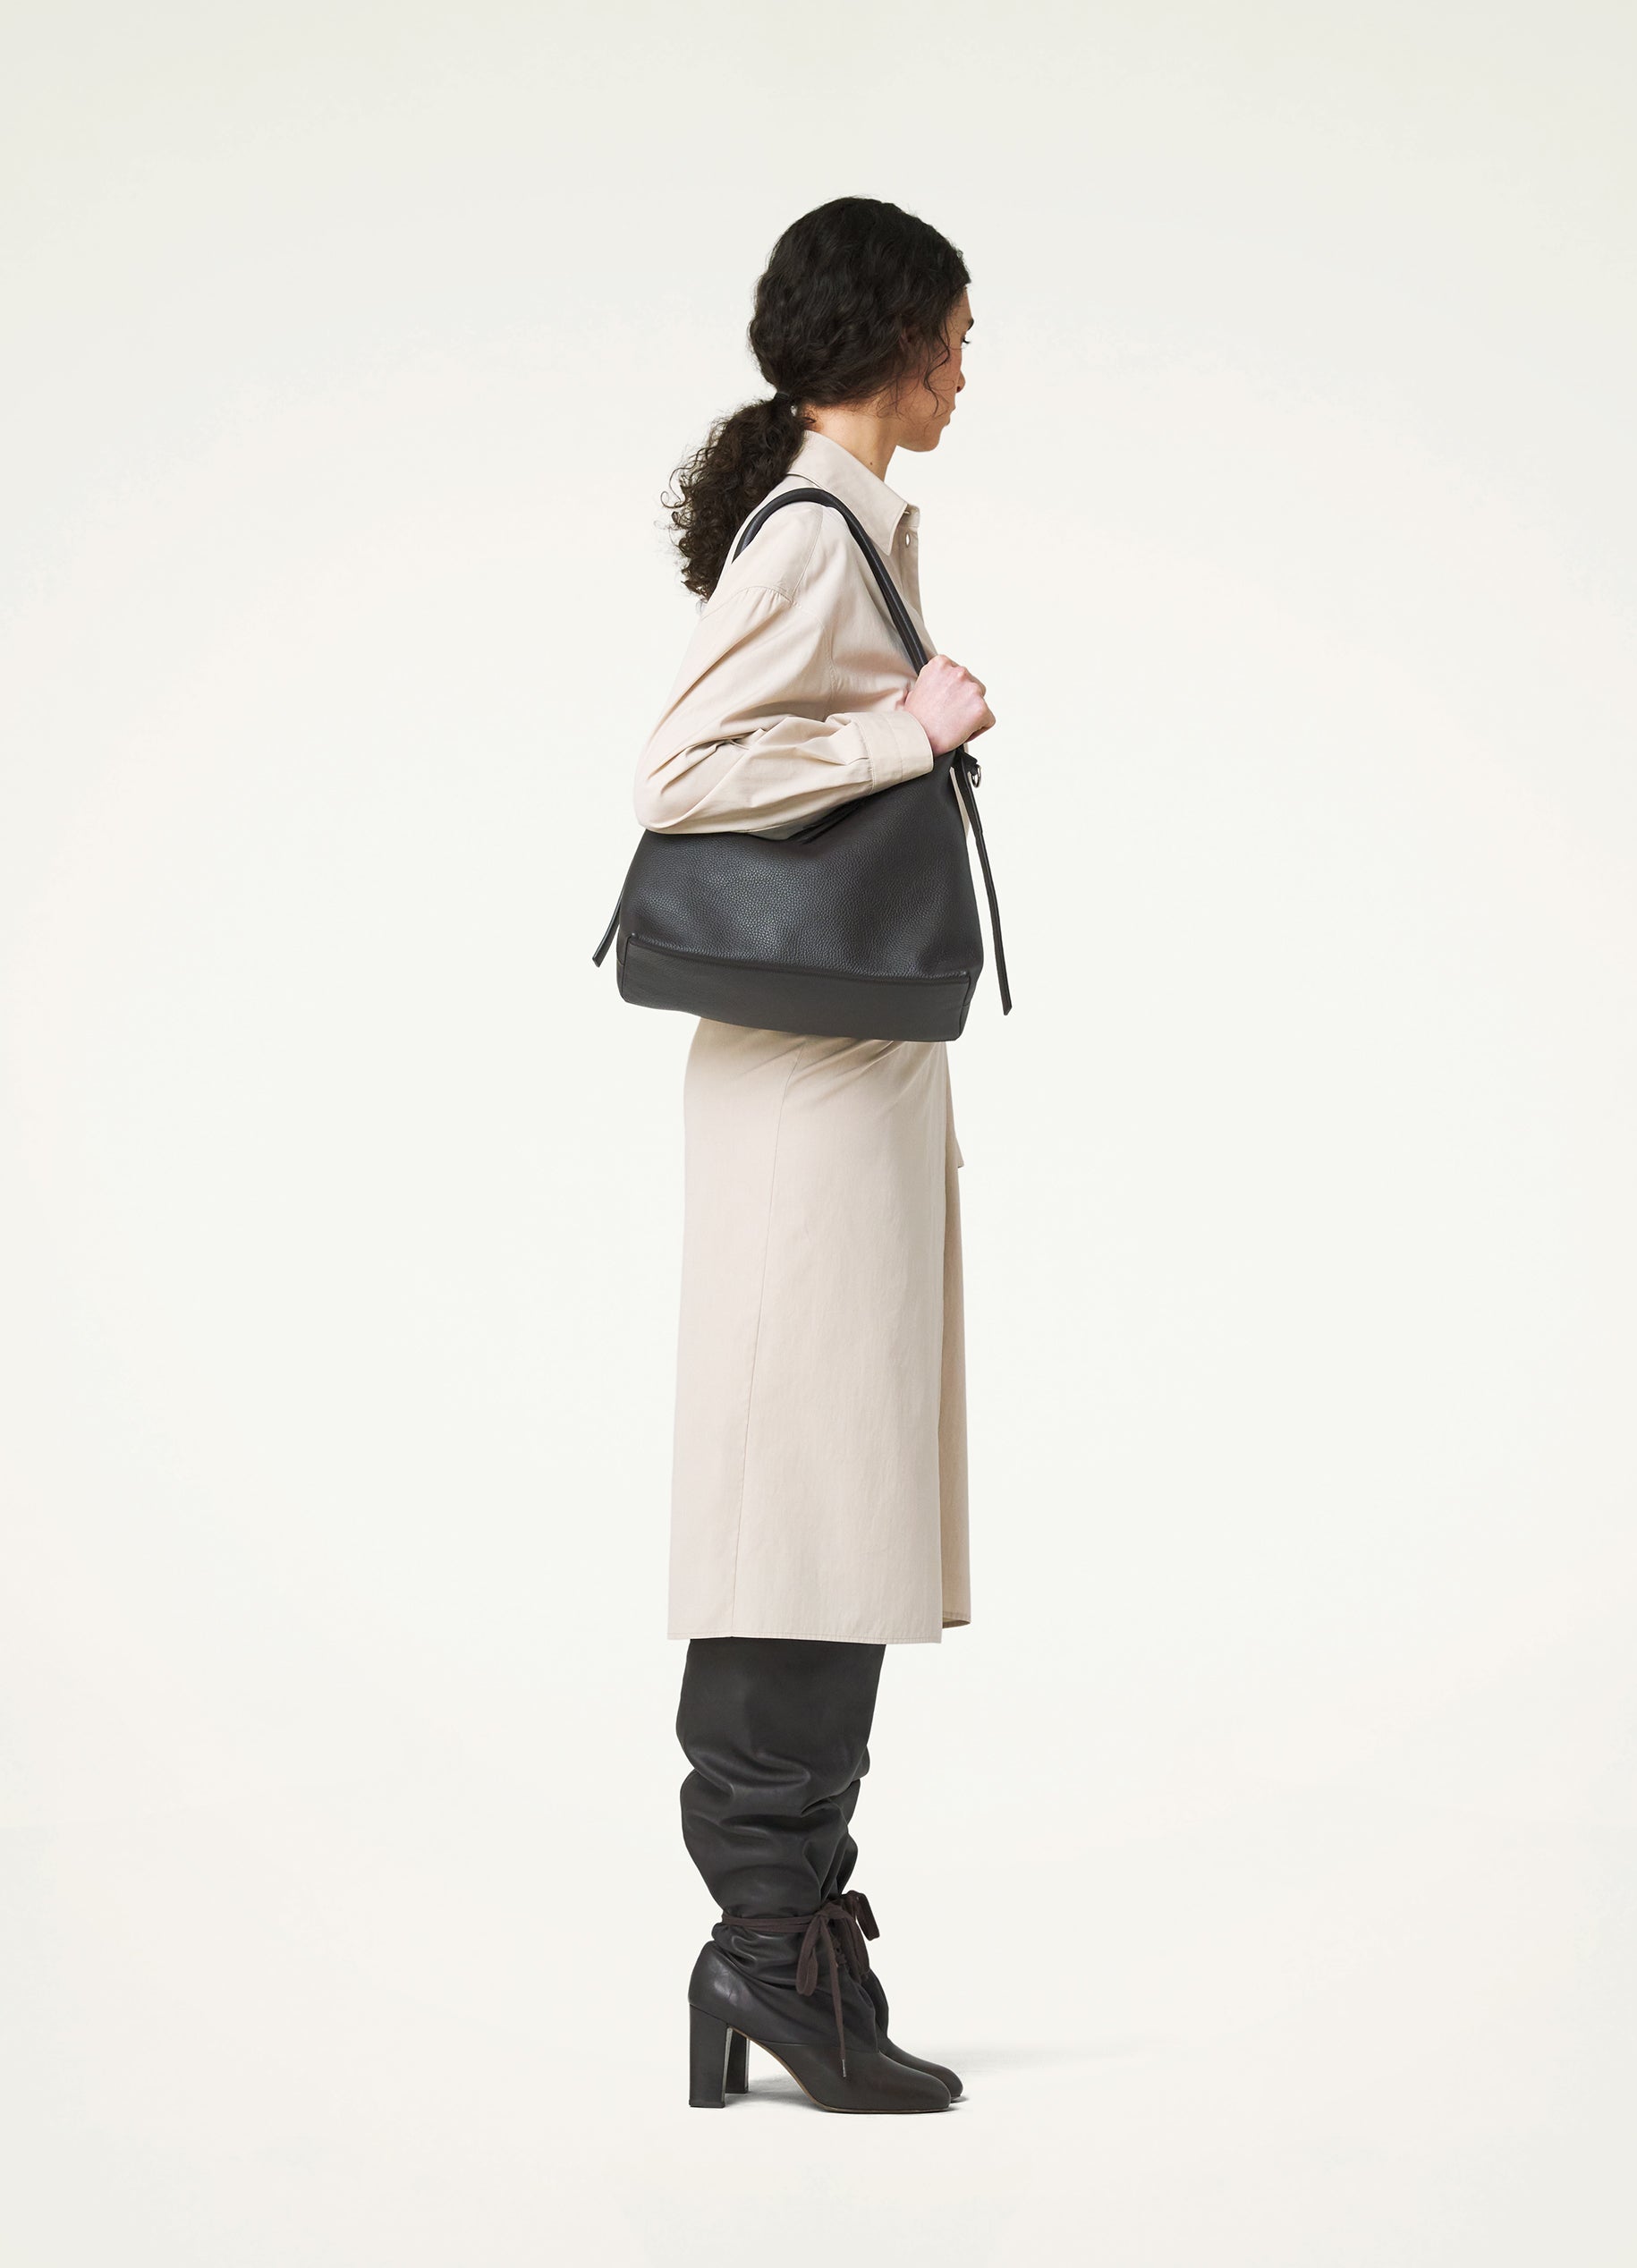 Dark Brown Hobo Belt Bag in Grained Soft Leather | LEMAIRE